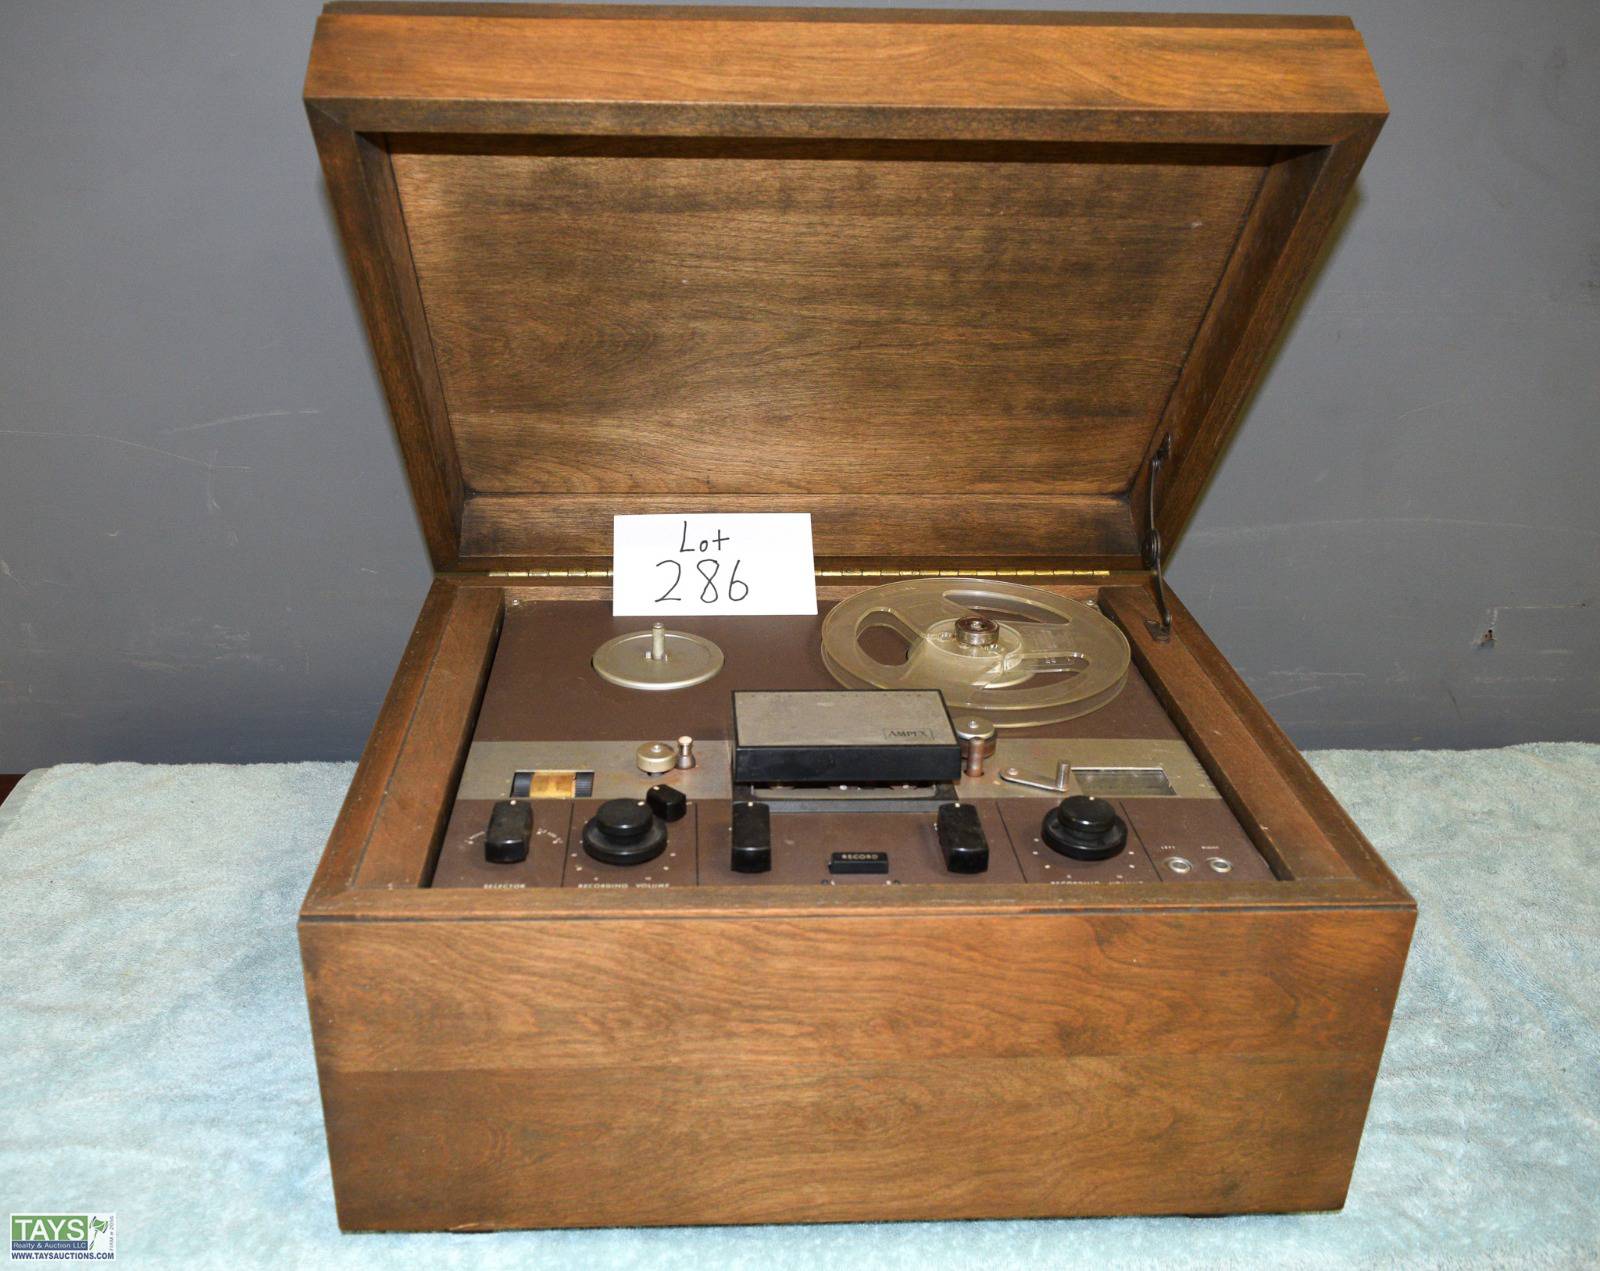 Tays Realty & Auction - Auction: ONLINE BENEFIT AUCTION: 54th ANNUAL  KIWANIS BENEFIT AUCTION ITEM: Ampex Reel to Reel Tape Recorder